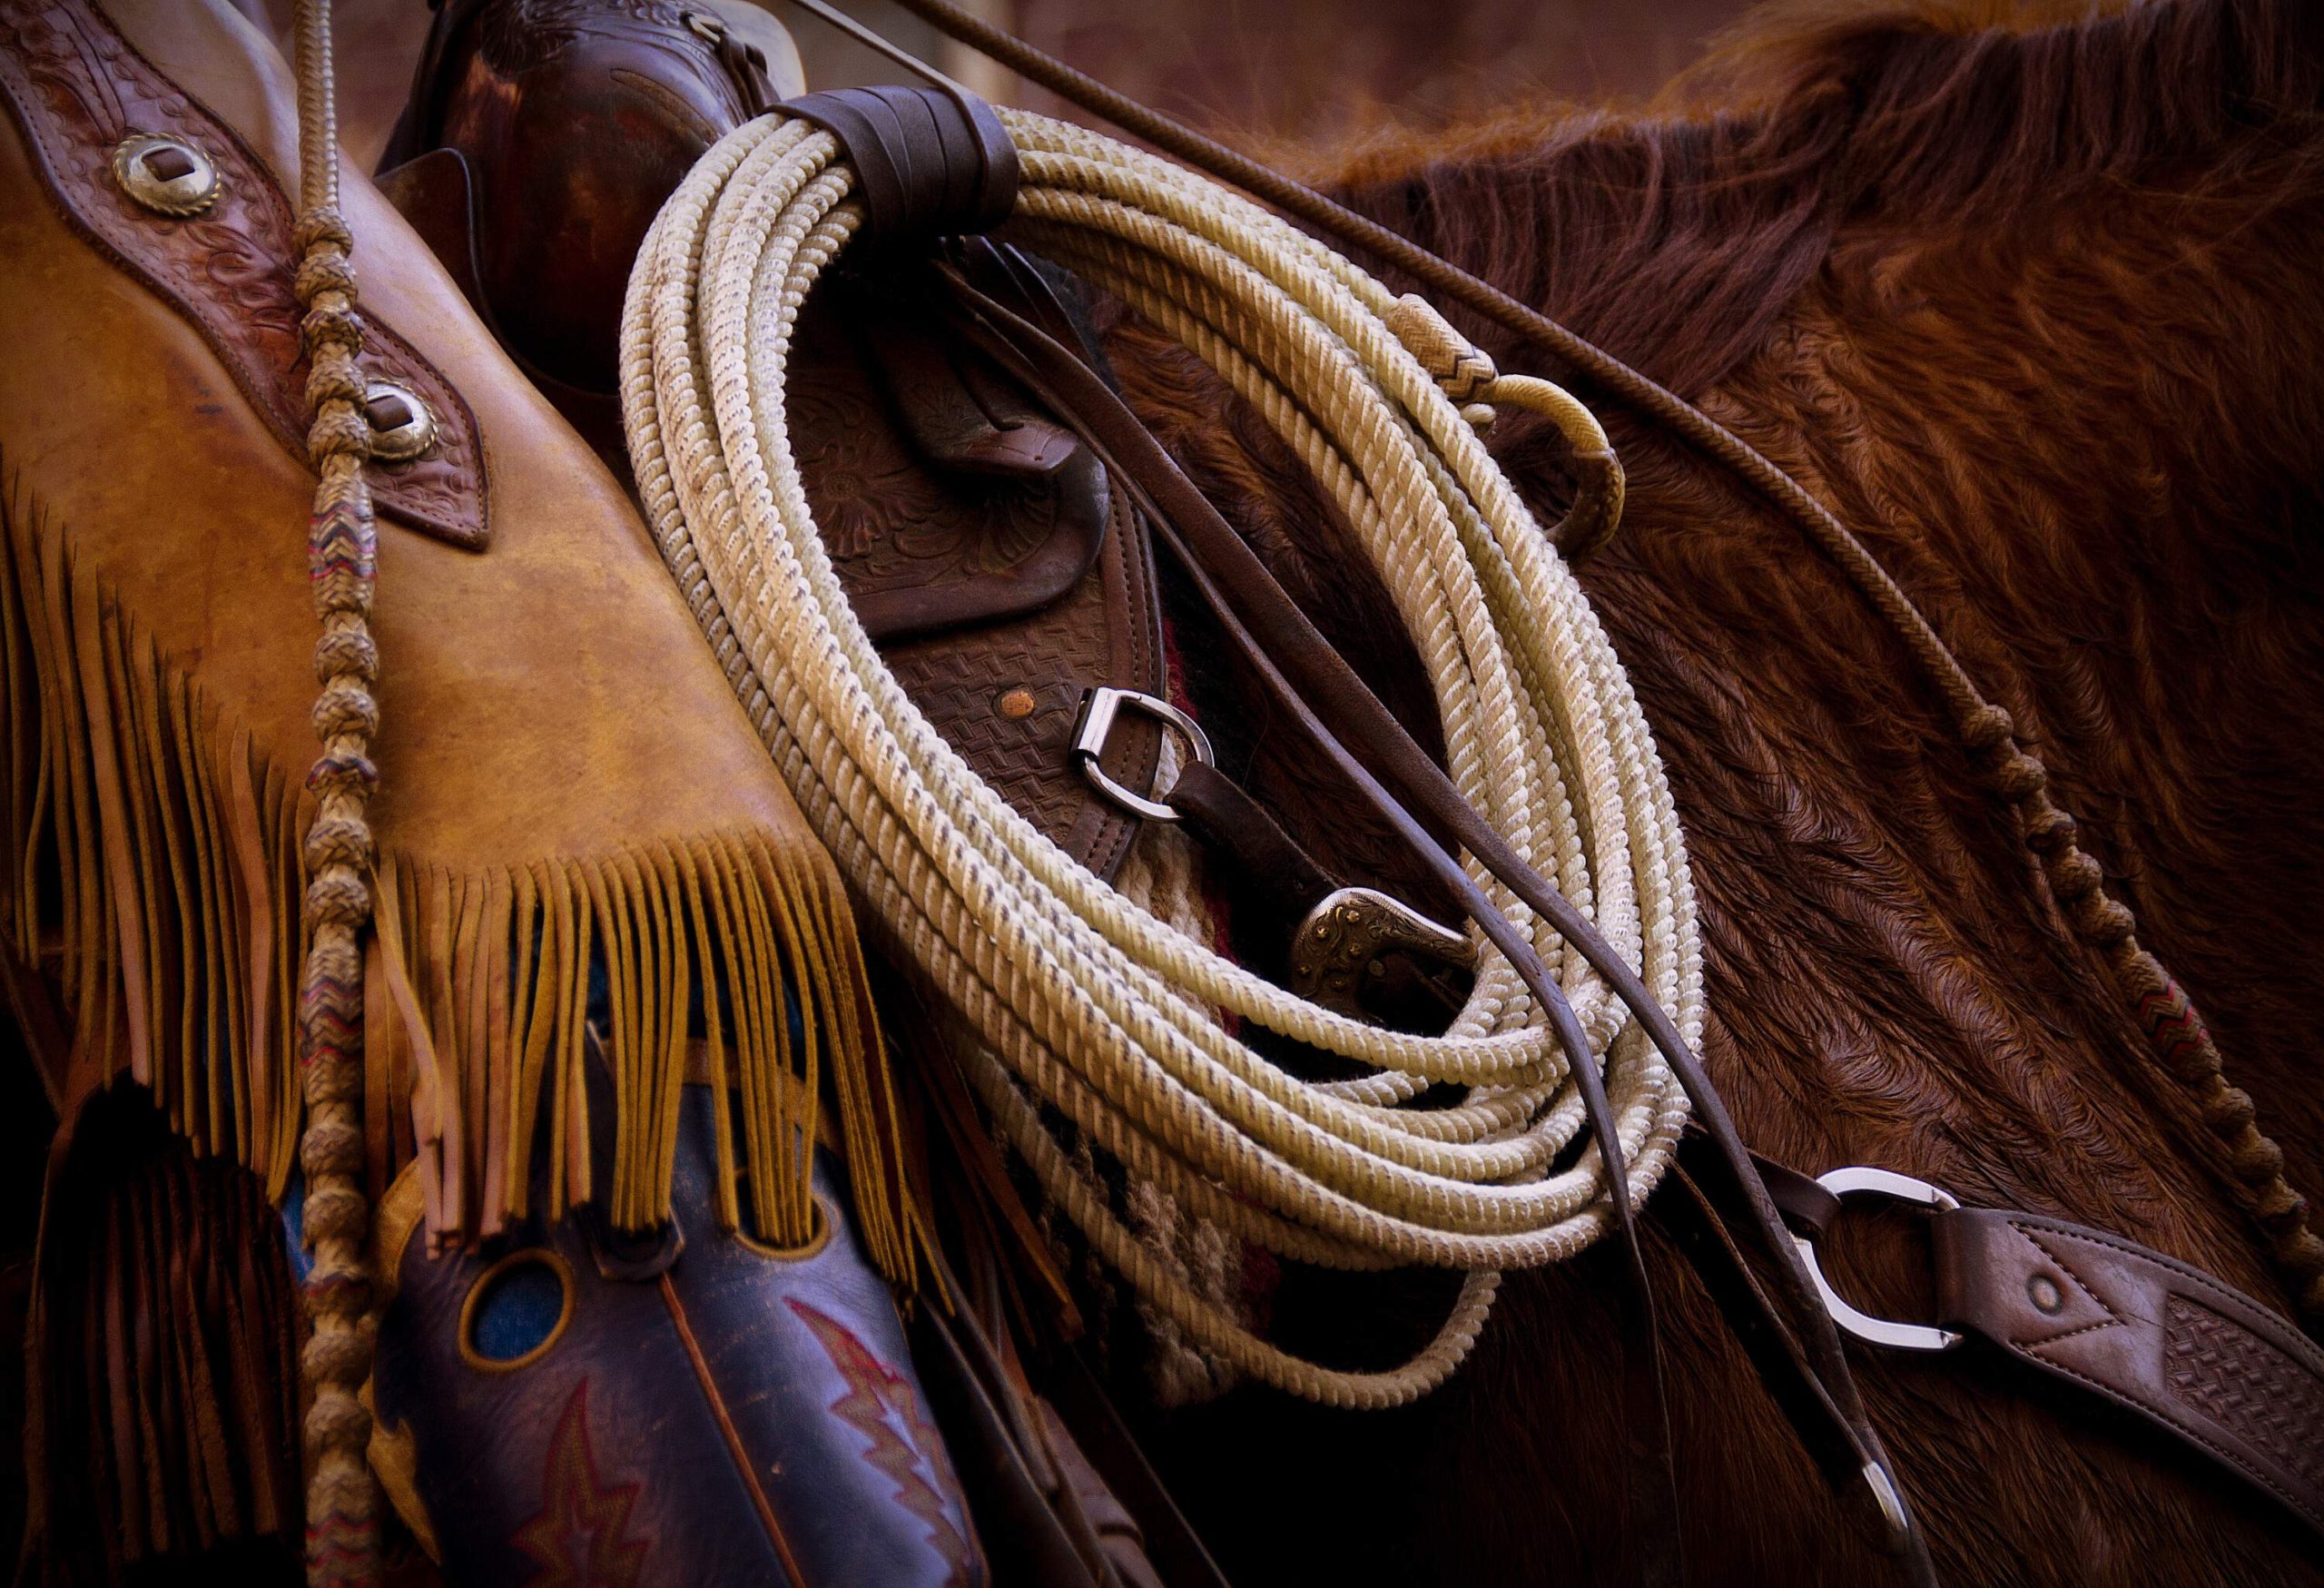 A coil of rope tied to a horse saddle.